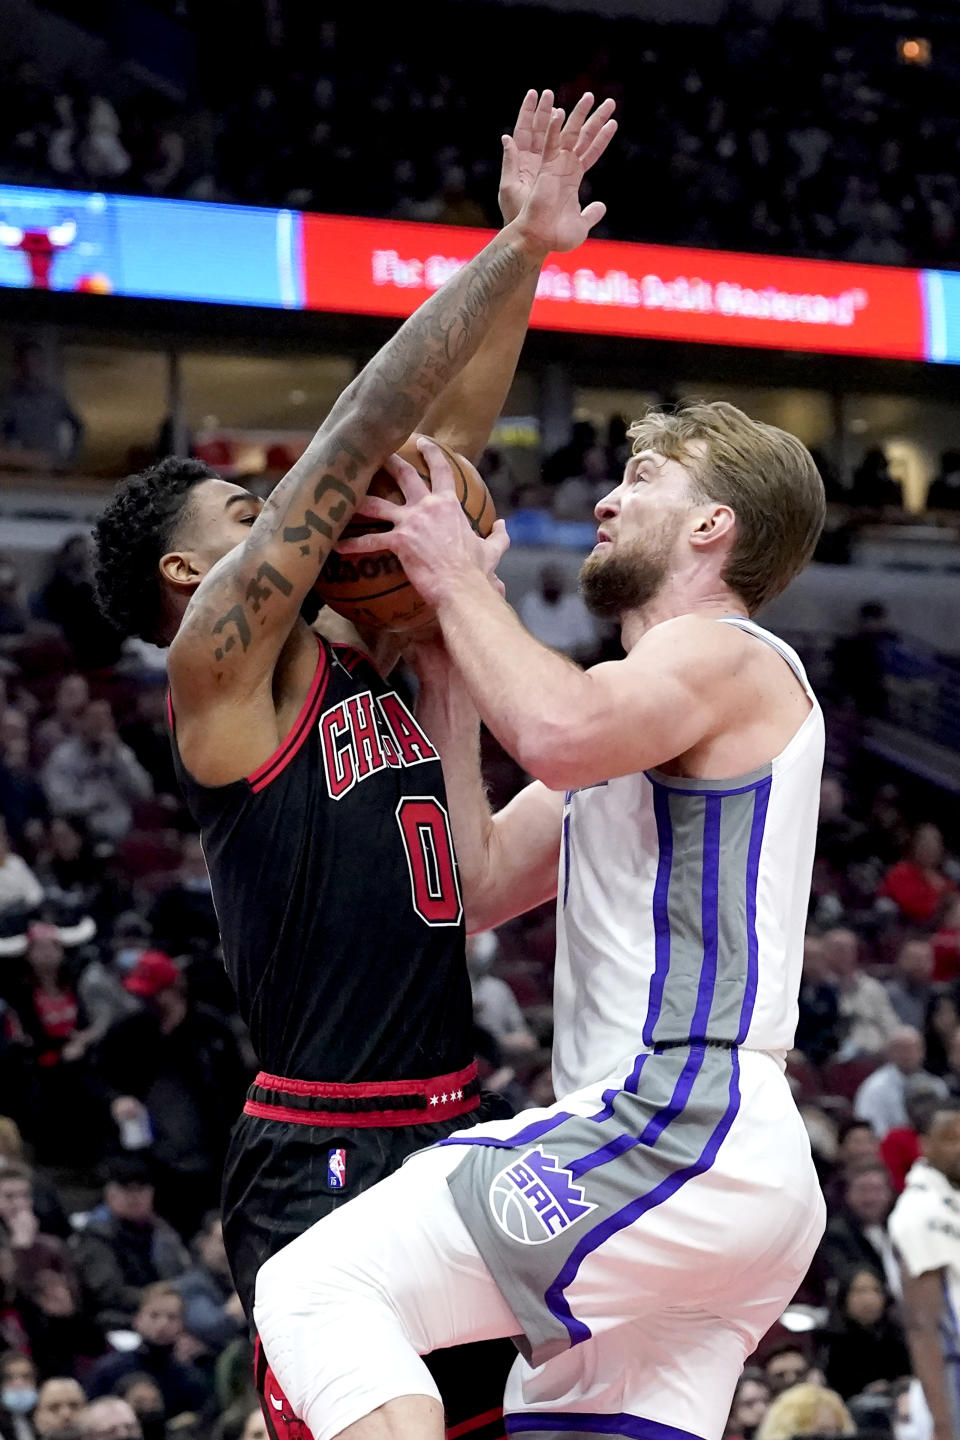 Chicago Bulls' Coby White (0) fouls Sacramento Kings' Domantas Sabonis during the first half of an NBA basketball game Wednesday, Feb. 16, 2022, in Chicago. (AP Photo/Charles Rex Arbogast)